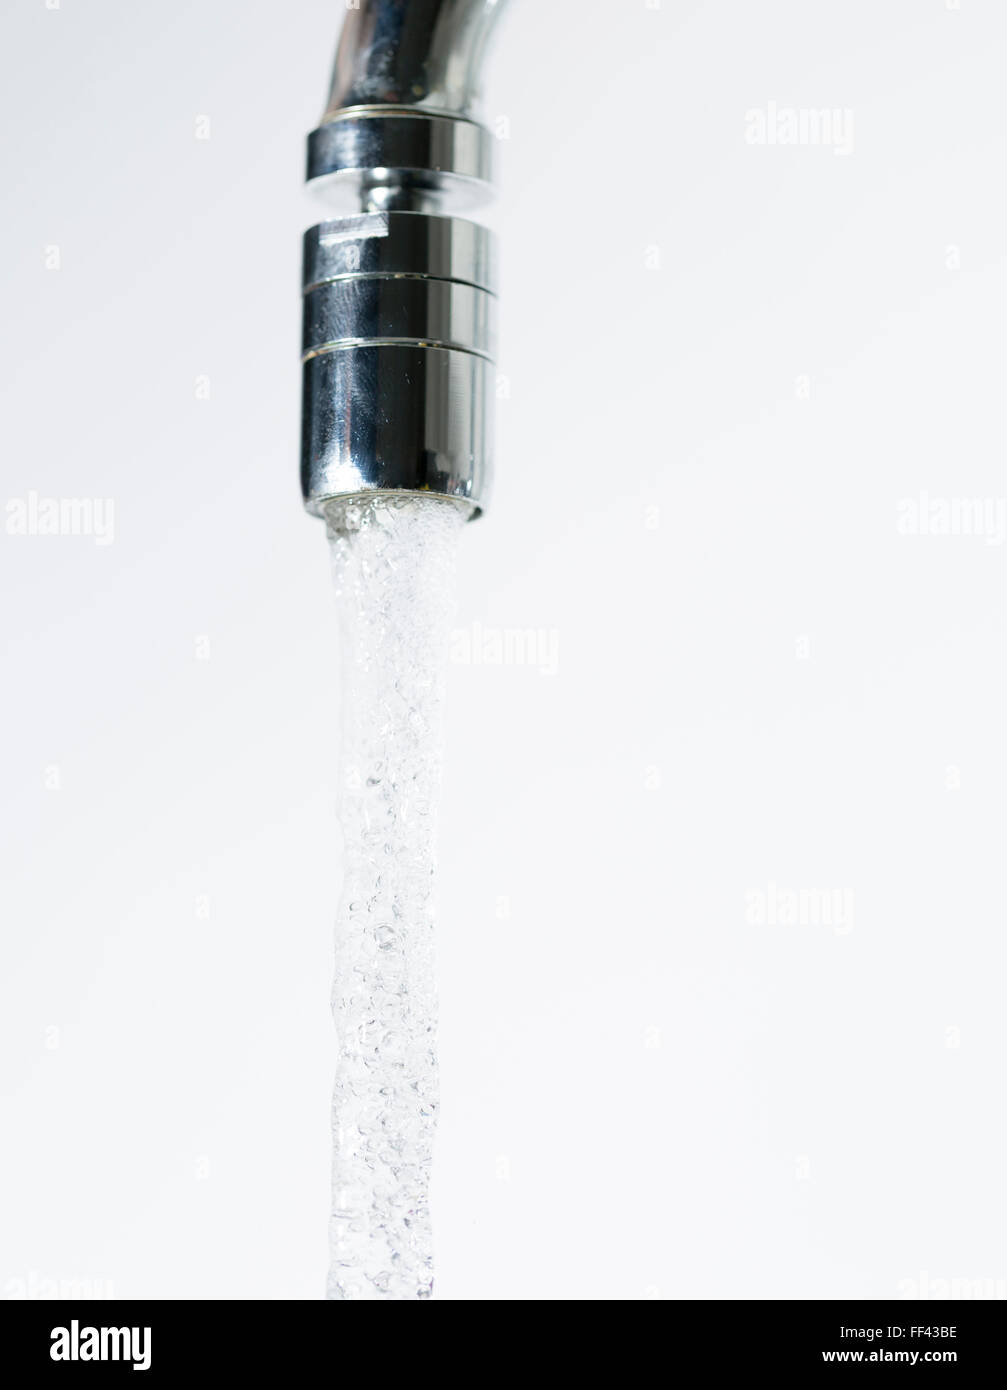 Water Pouring from Water Faucet close up. Stock Photo